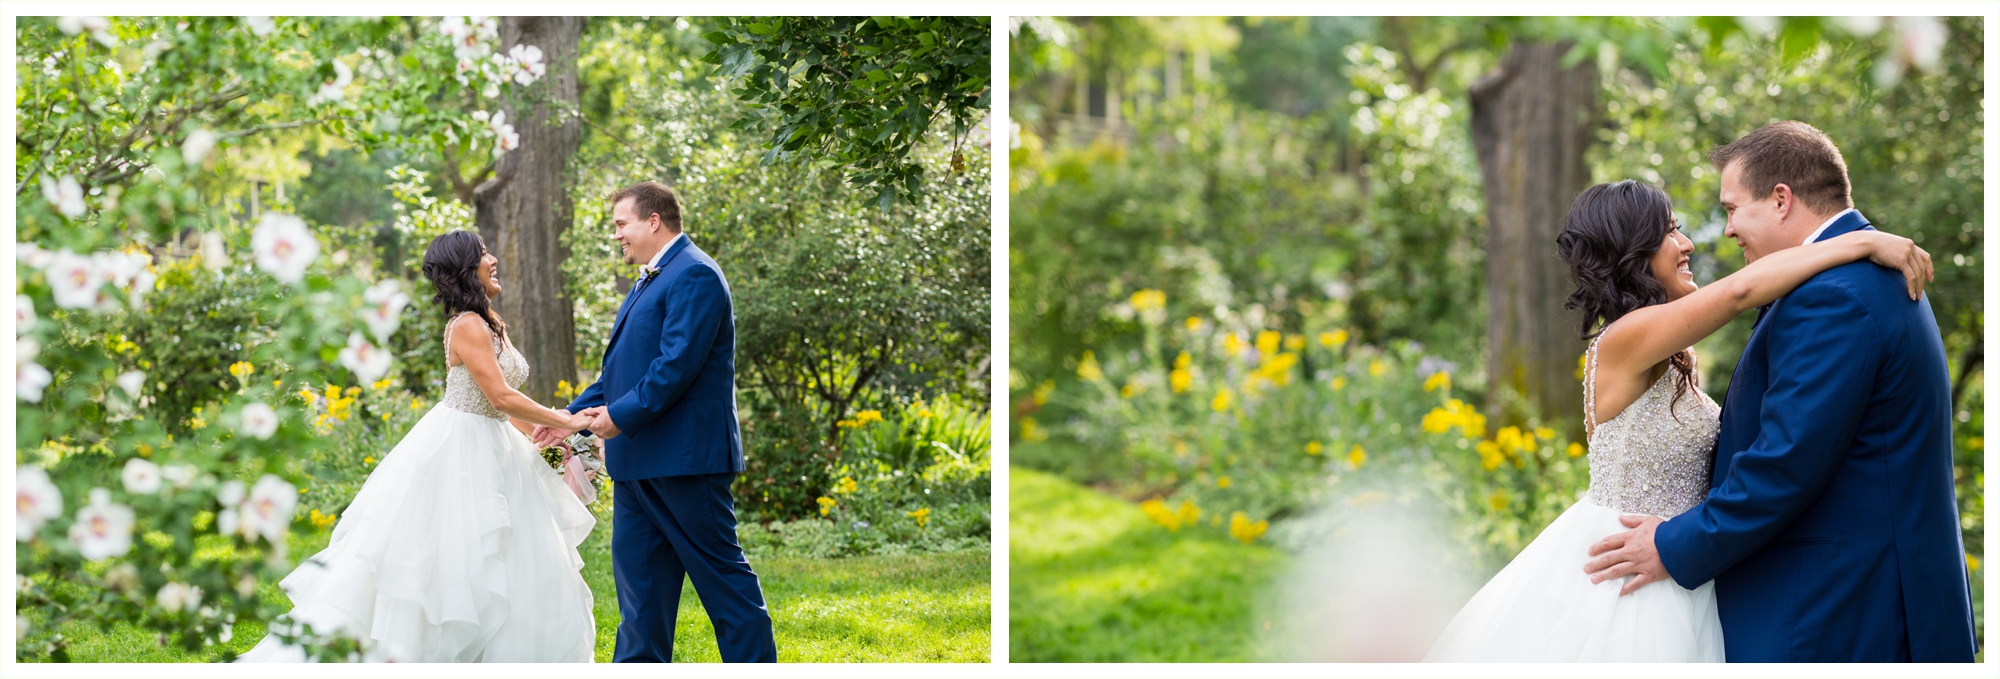 bride and groom share first look in boulder colorado near chautauqua park